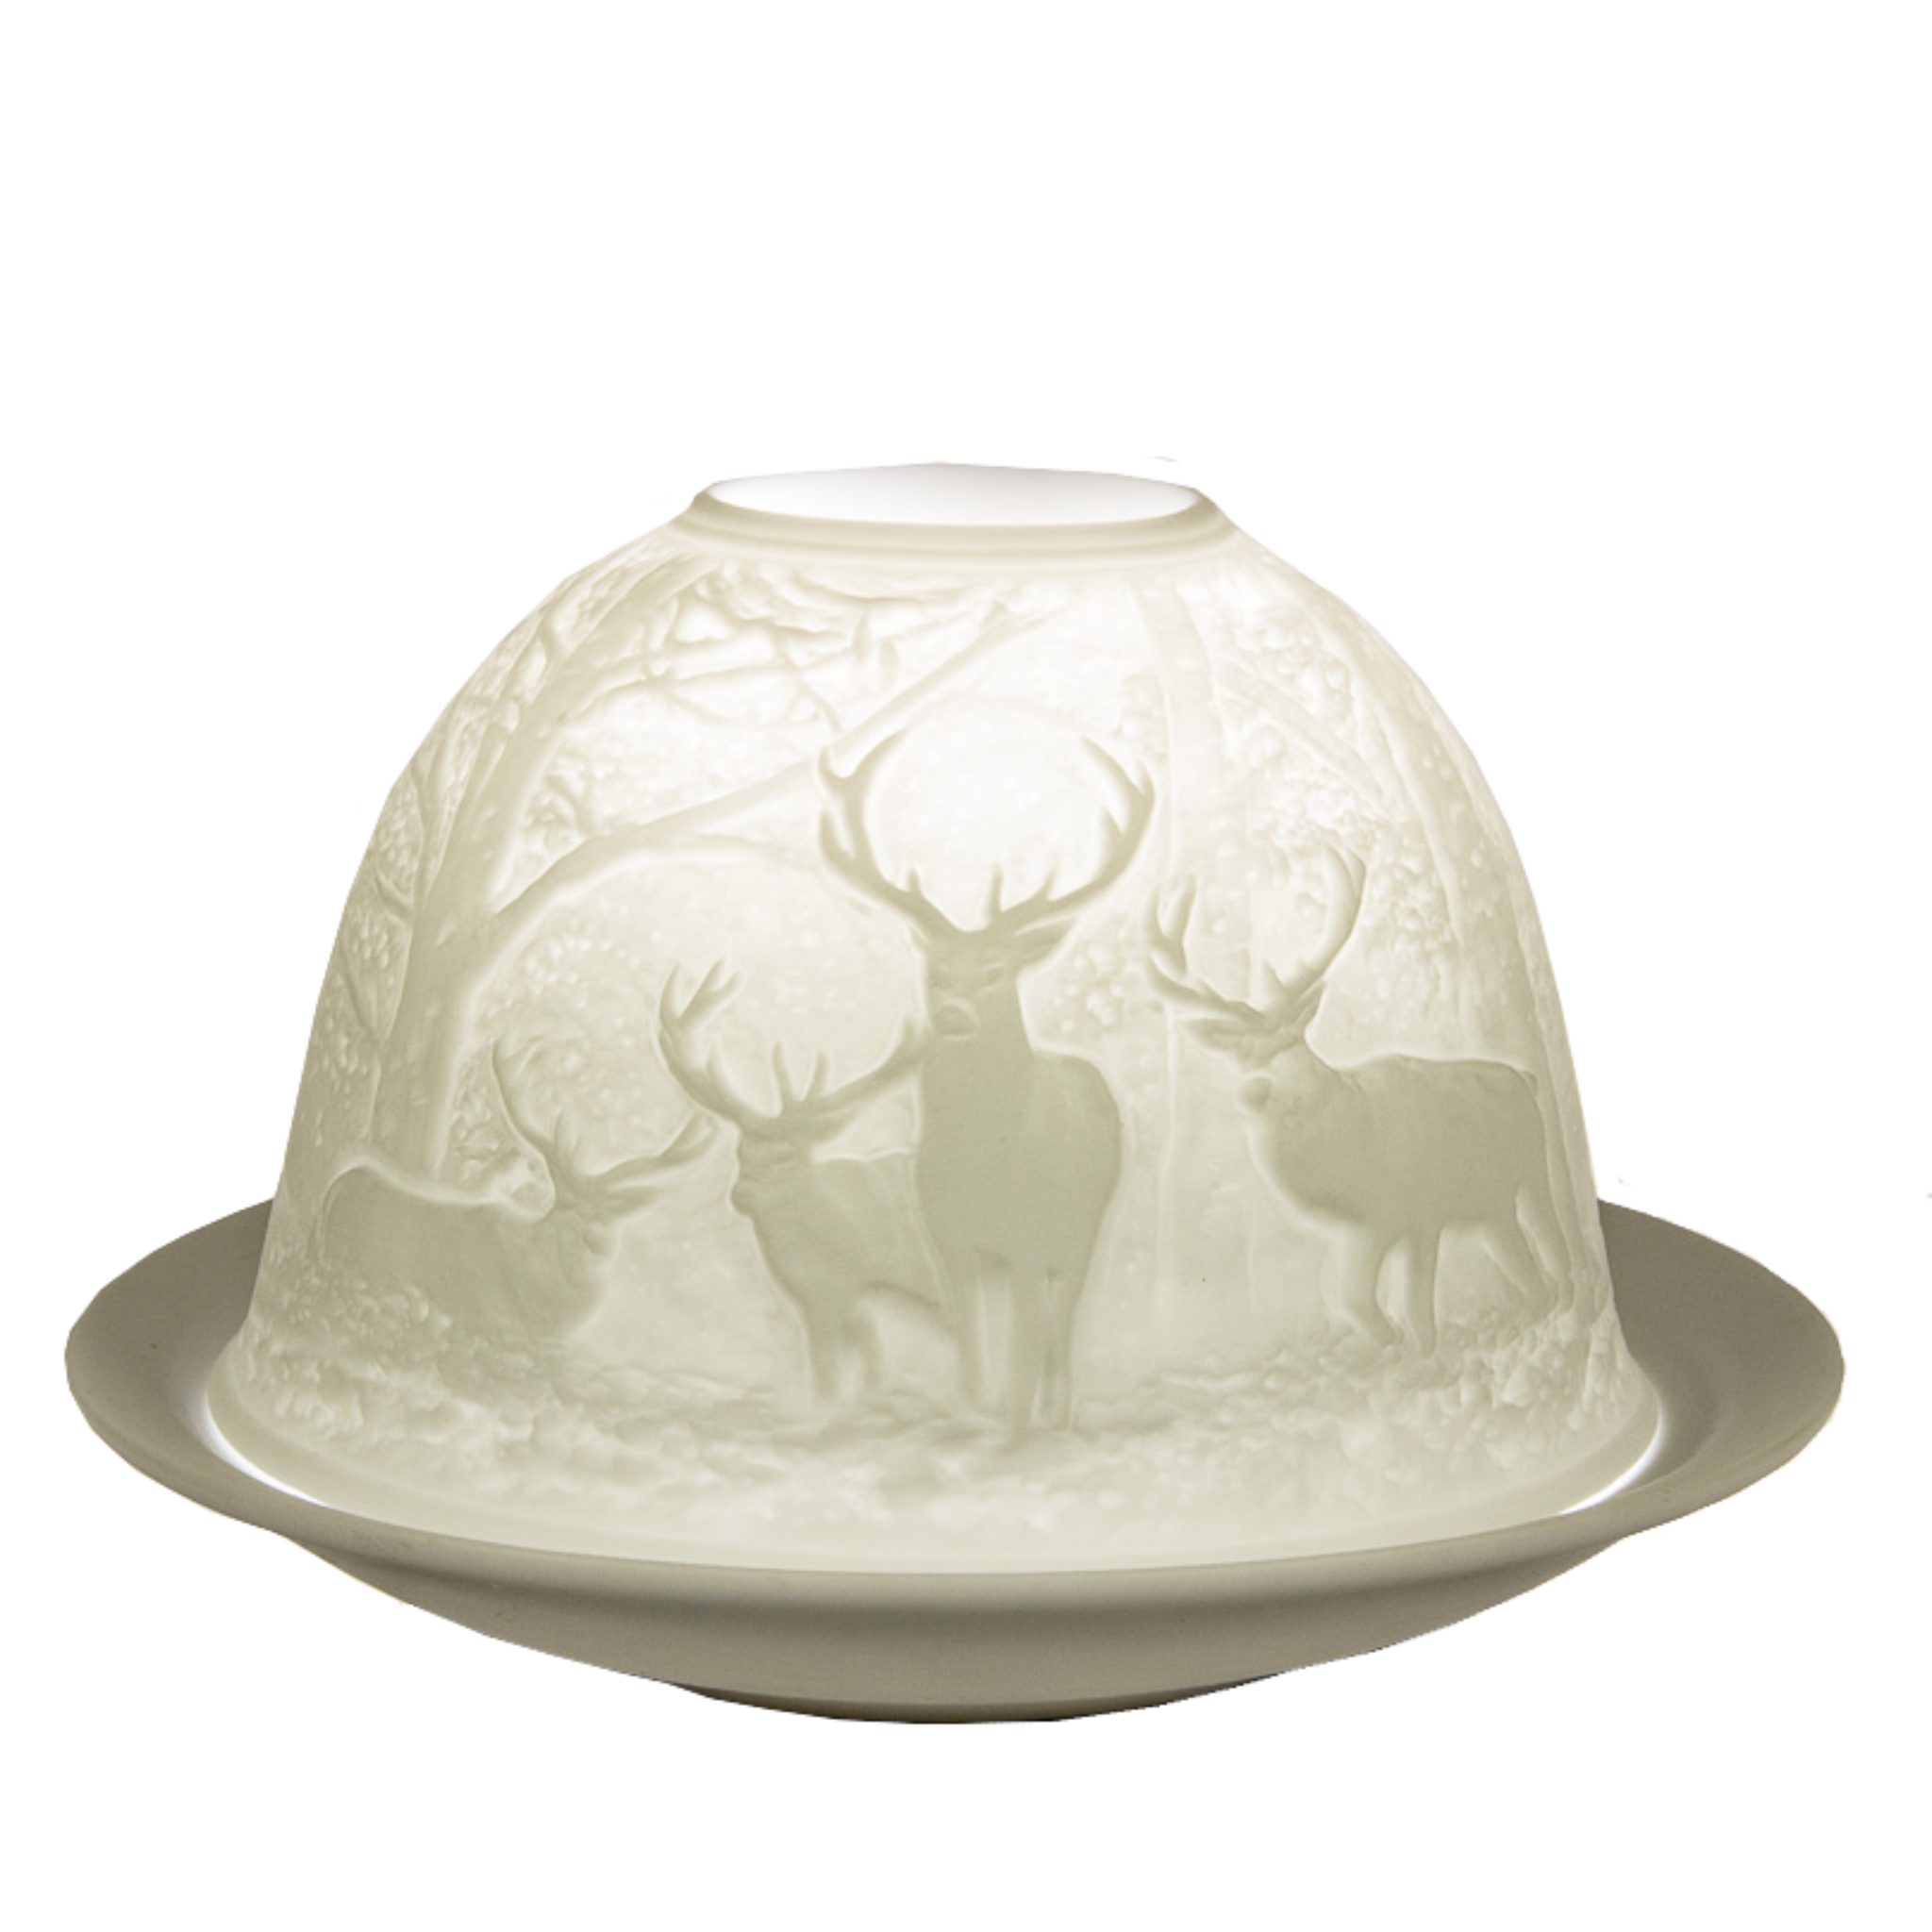 Stags in Forest, Domelights Pack of 6